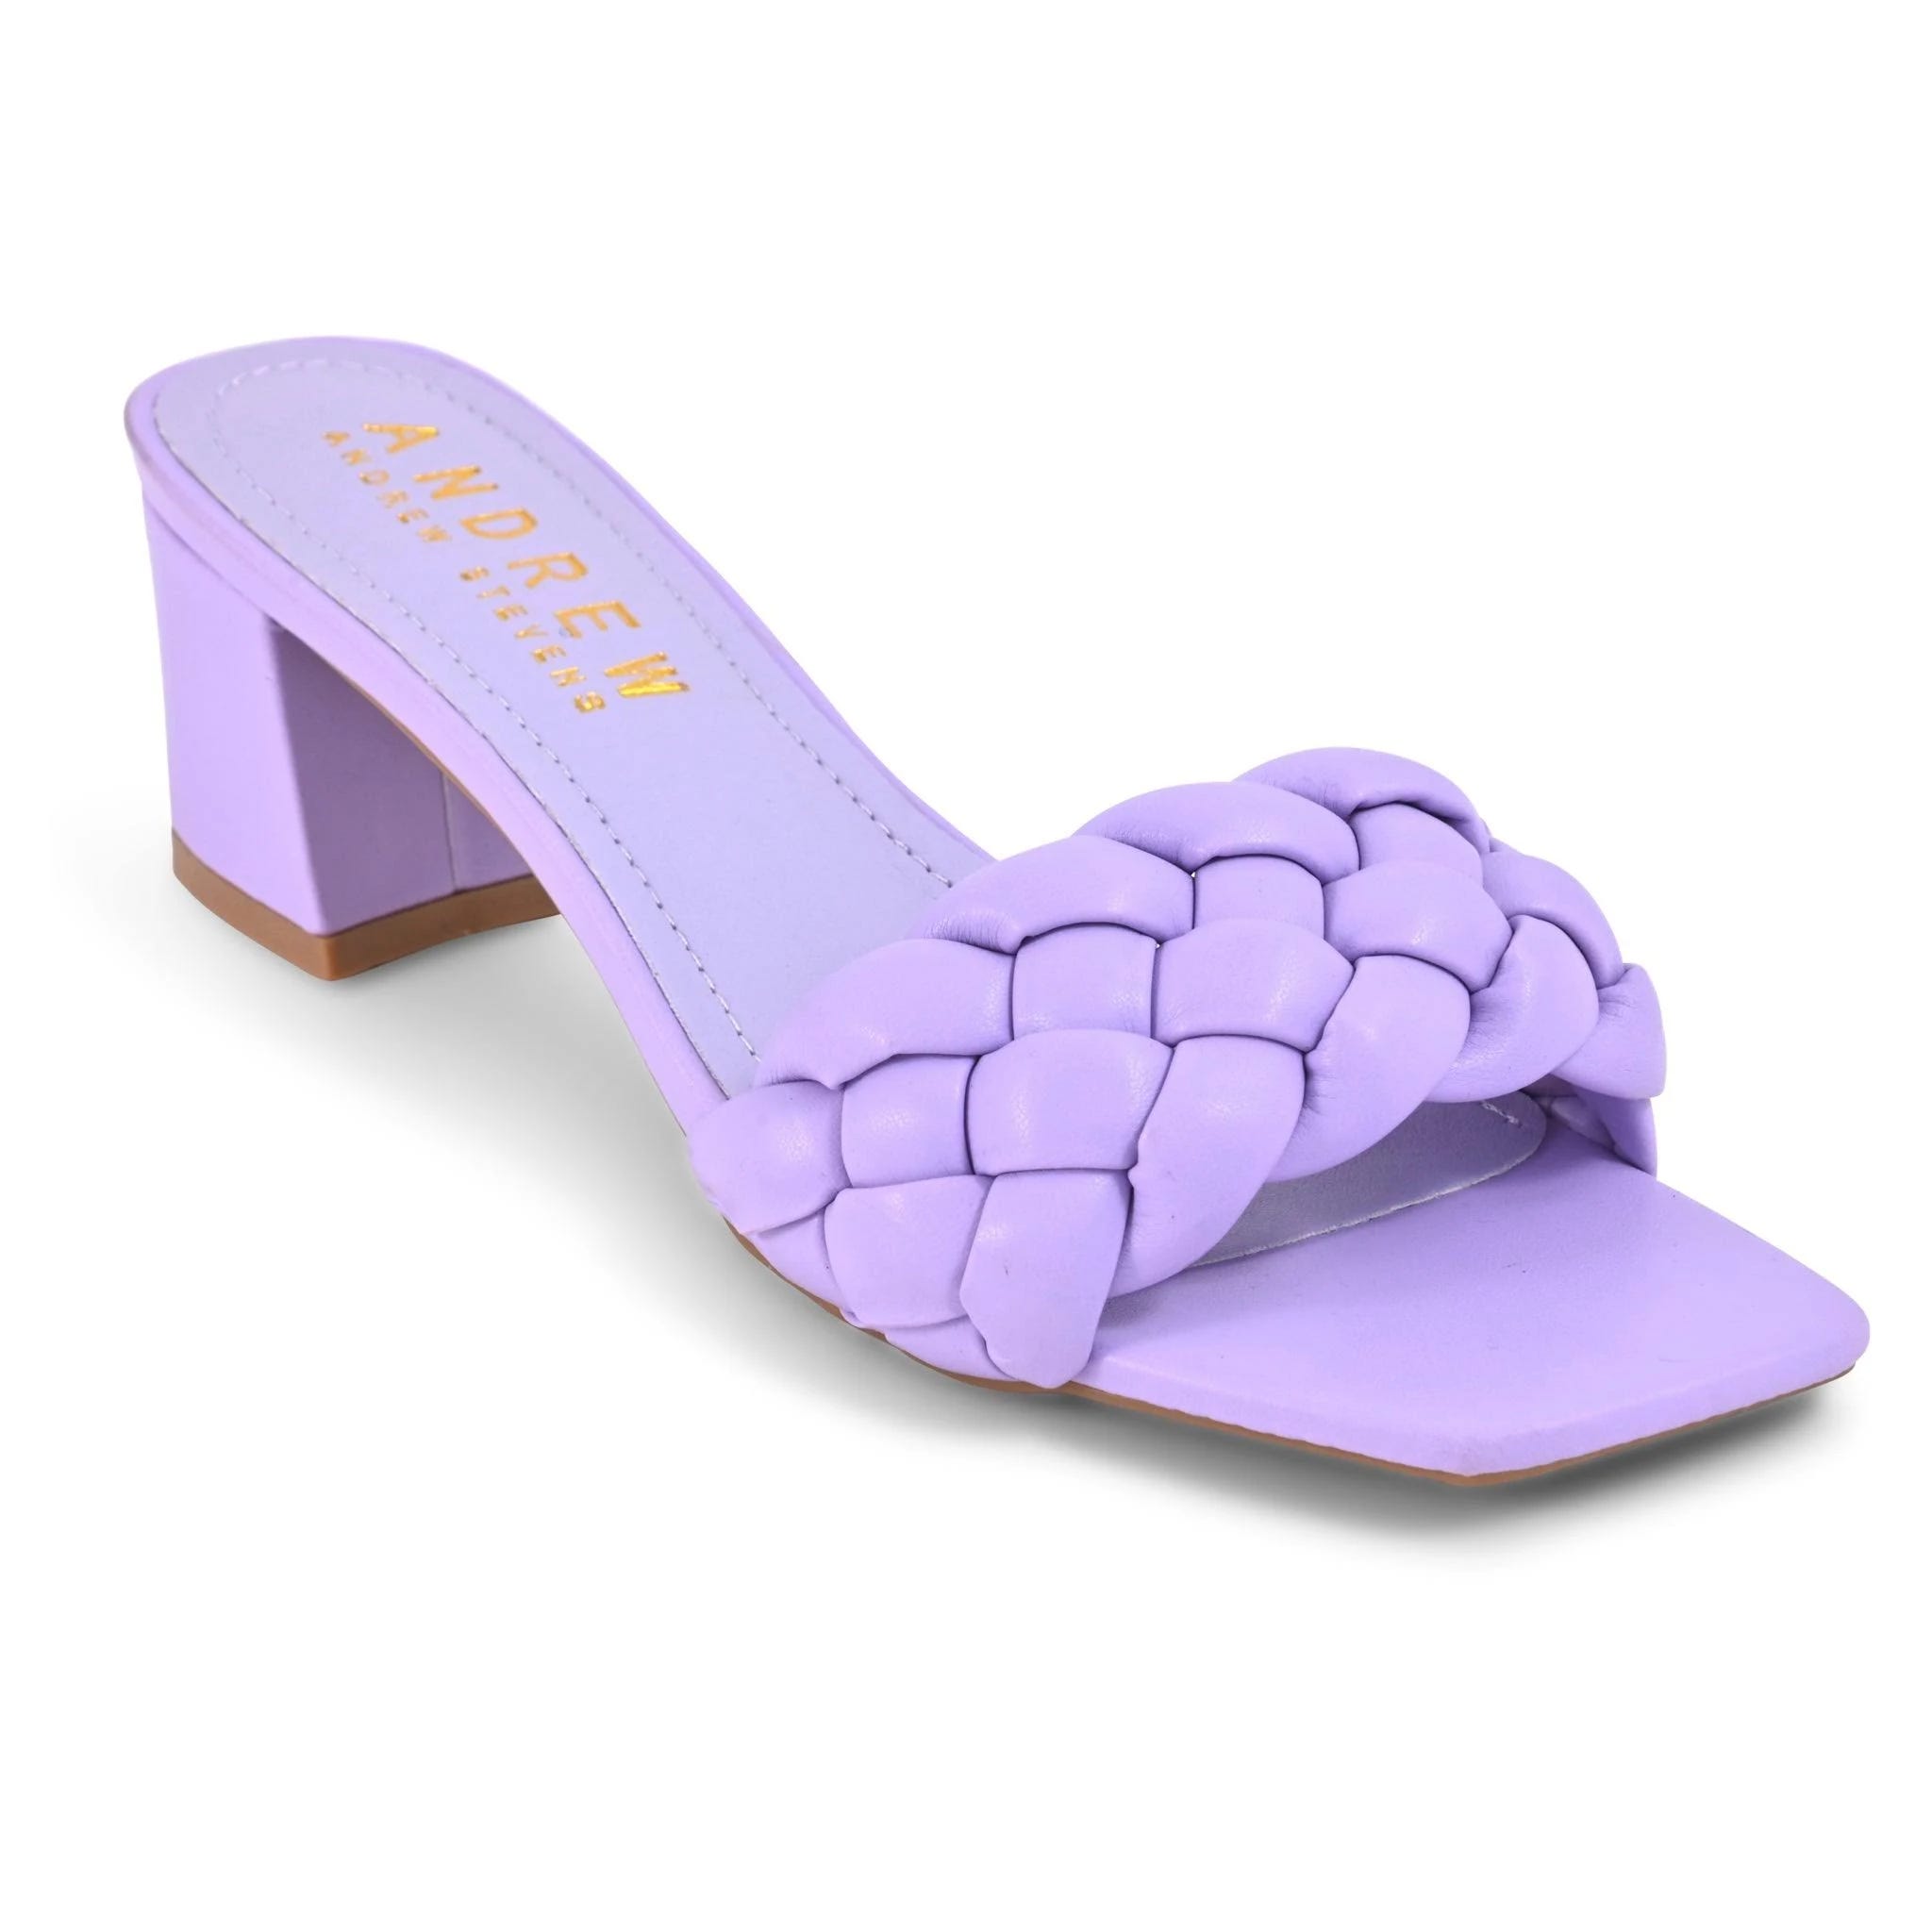 Lavender Aya Women's Sandals: Comfortable Style for all Occasions | Image